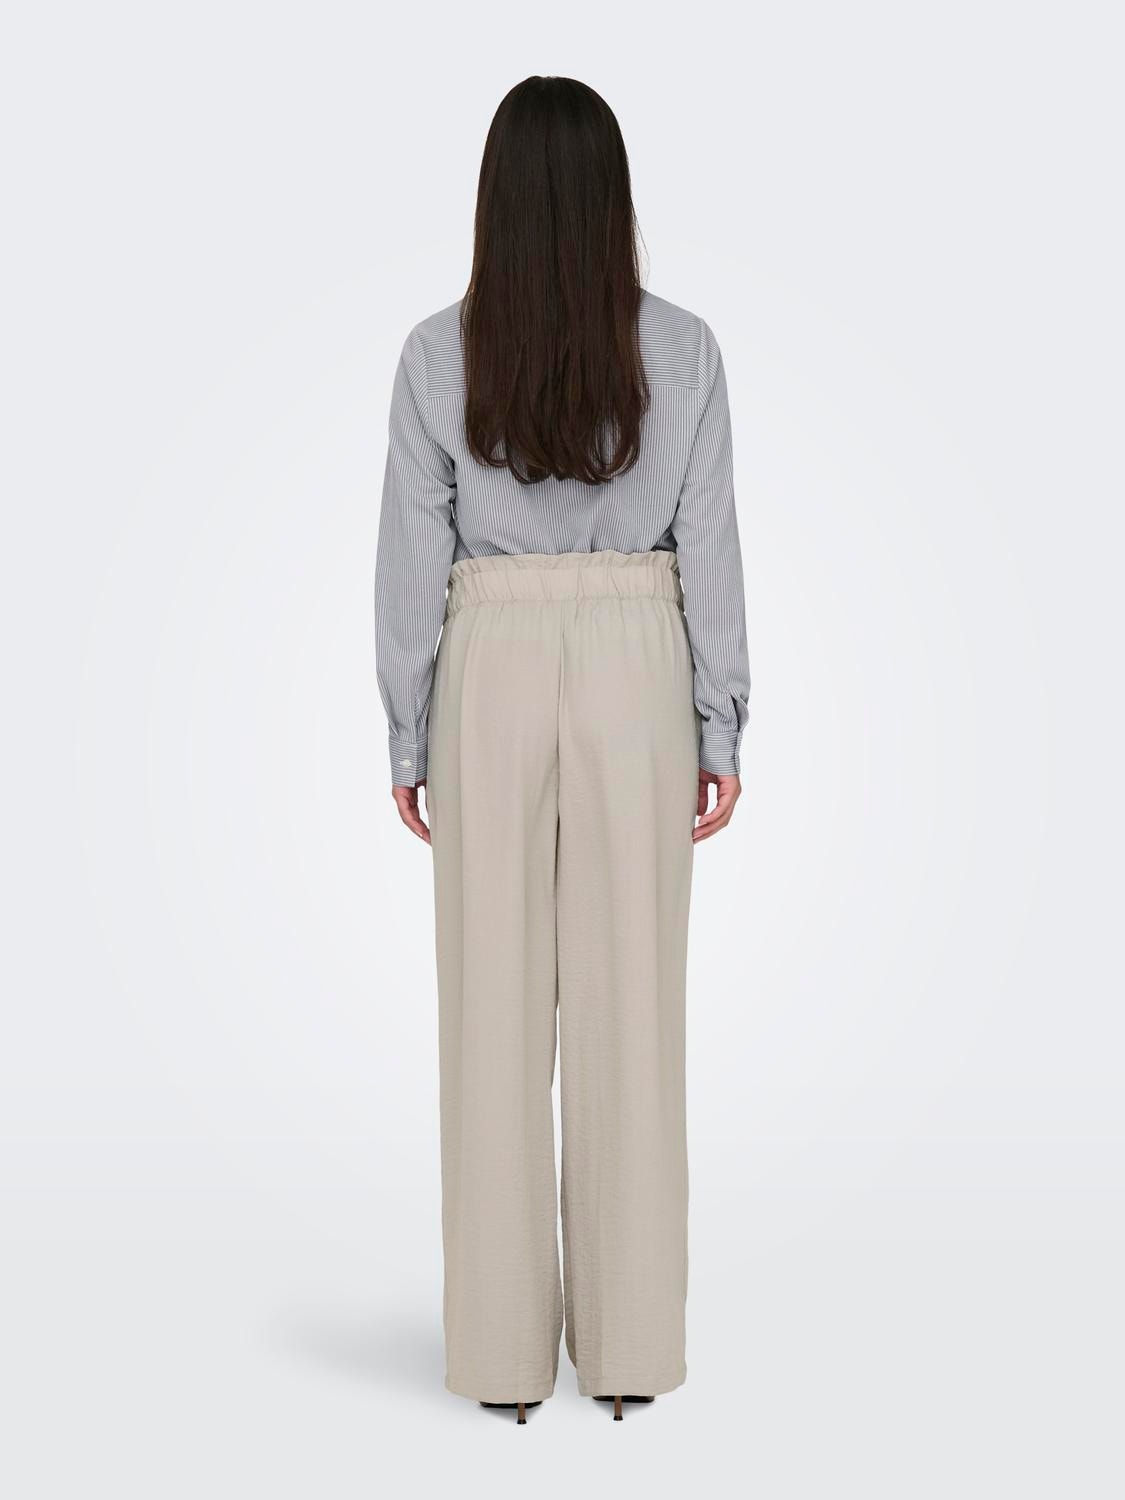 ONLY Regular Fit High waist Trousers -Chateau Gray - 15271184